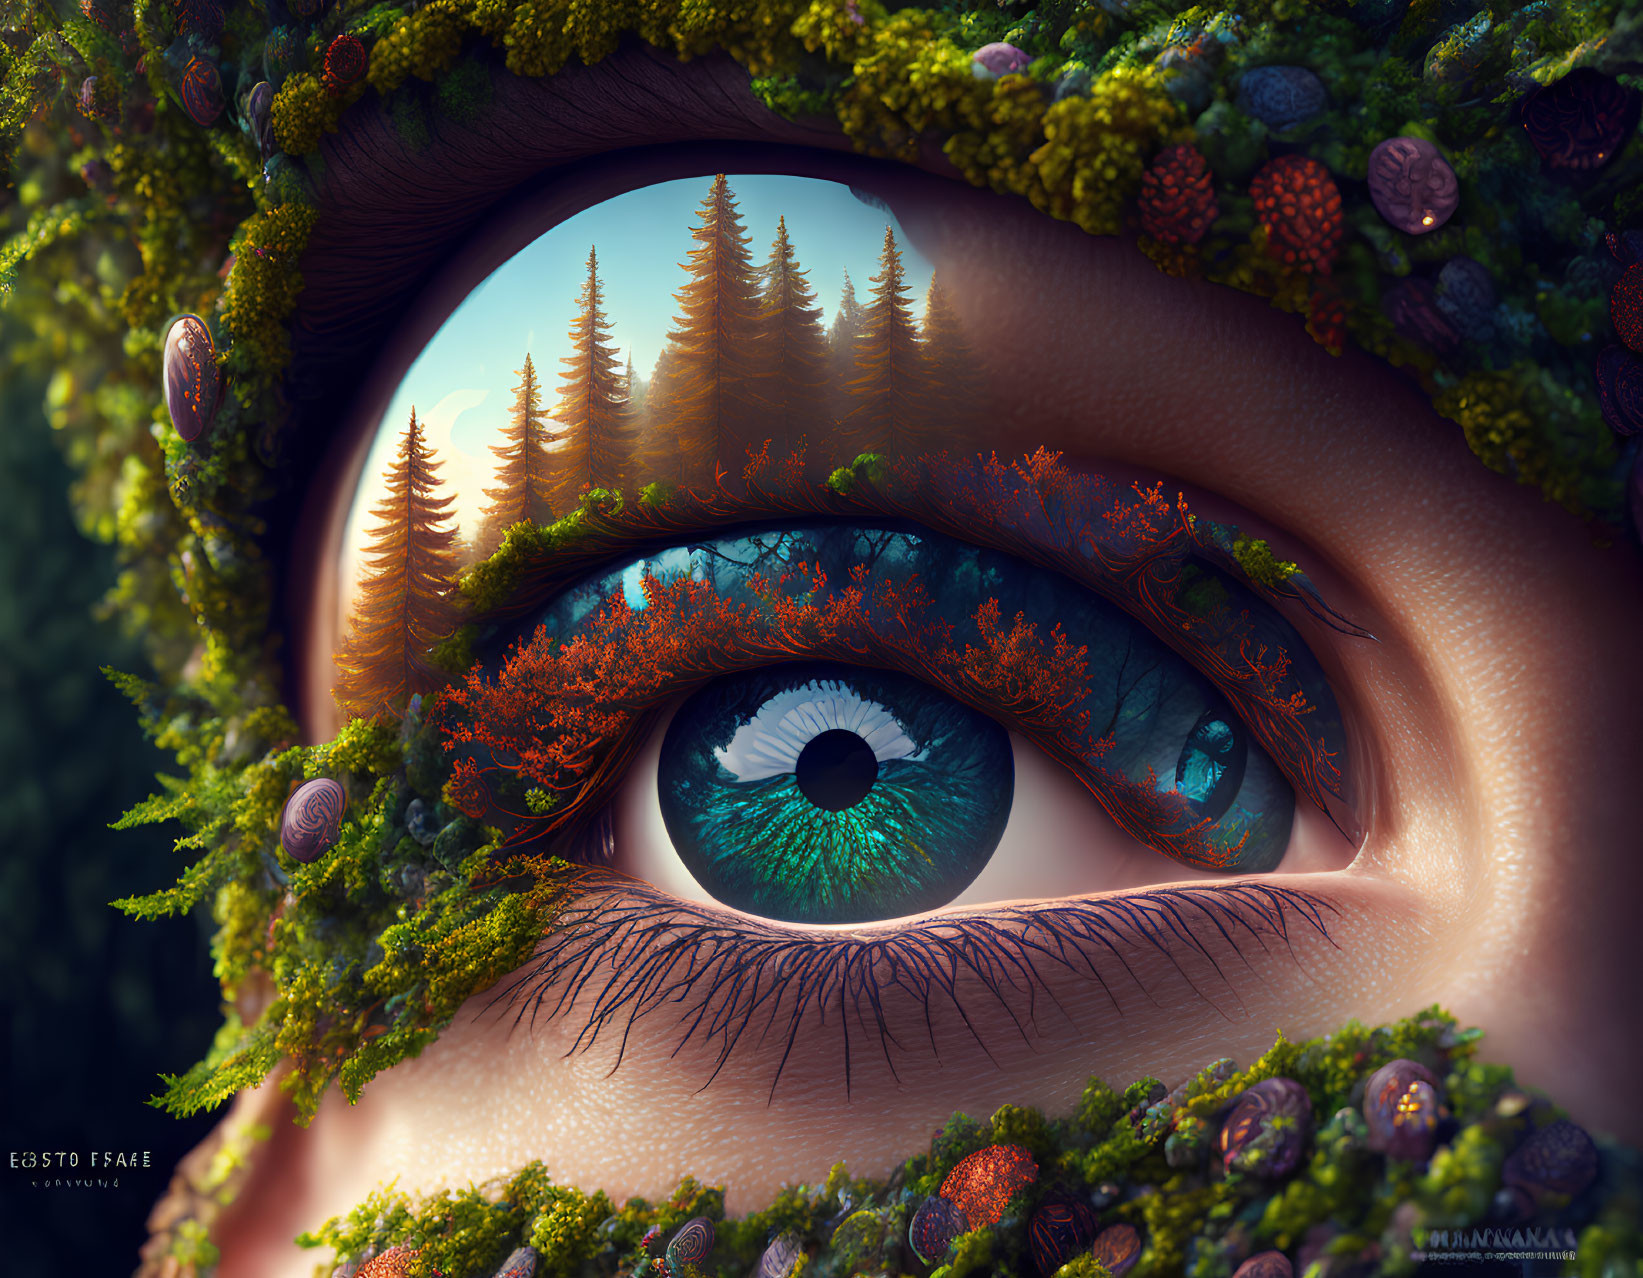 Detailed close-up of human eye reflecting forest and mountains with foliage and berries.